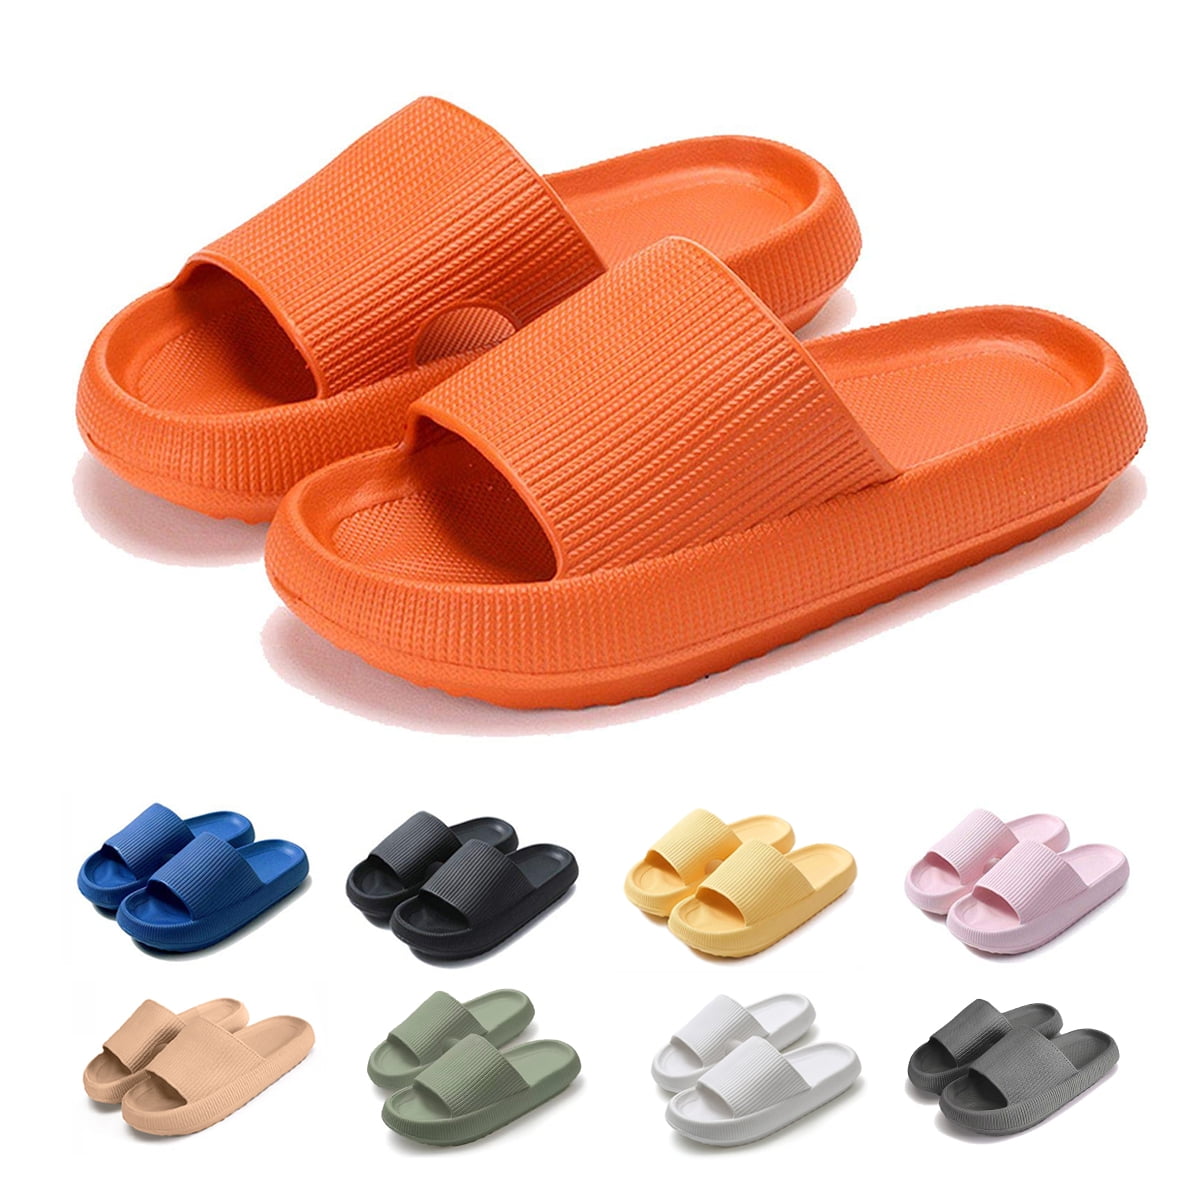 Athlefit Pillow Slides Shower Shoes Slippers Quick Drying Bathroom Sandals Soft Cushioned Extra Thick Massage Pool Gym House Pillow Slides for Women Men